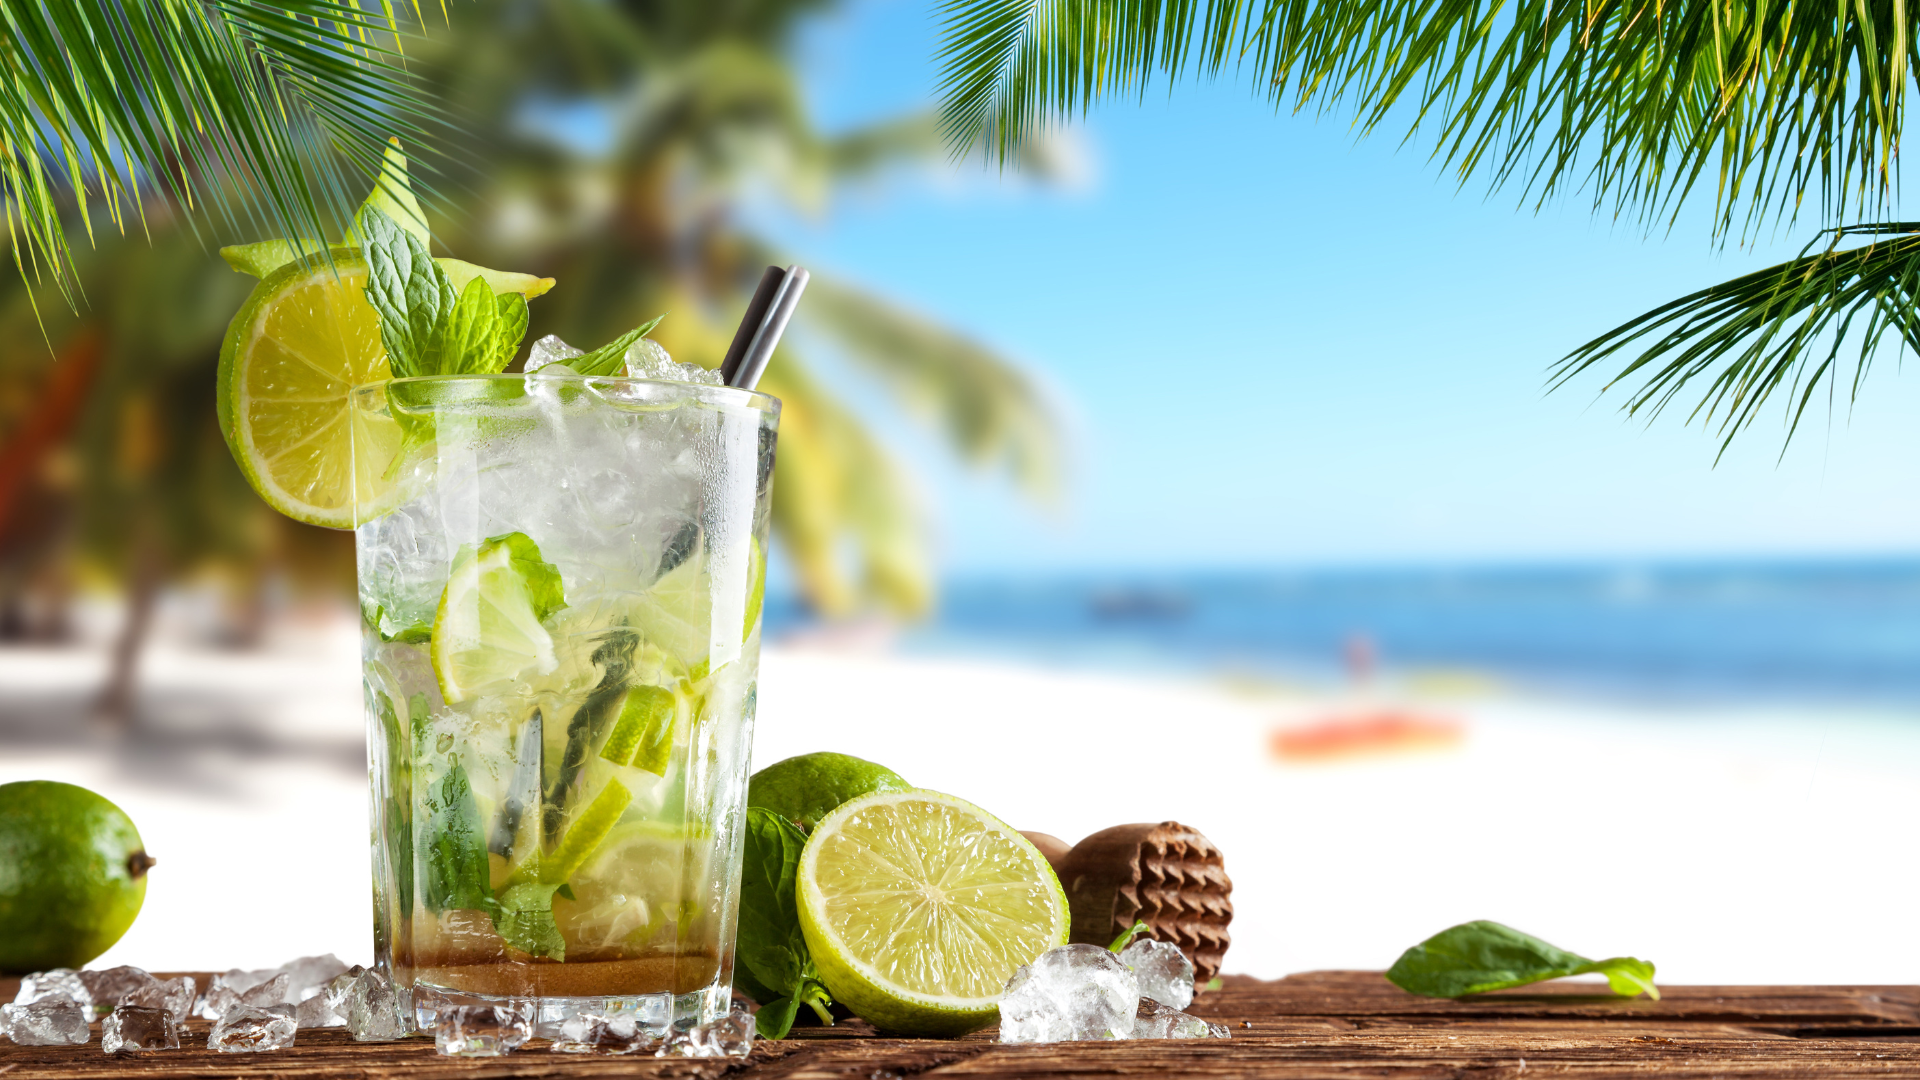 Mojito on a table with limes with a beach in the background